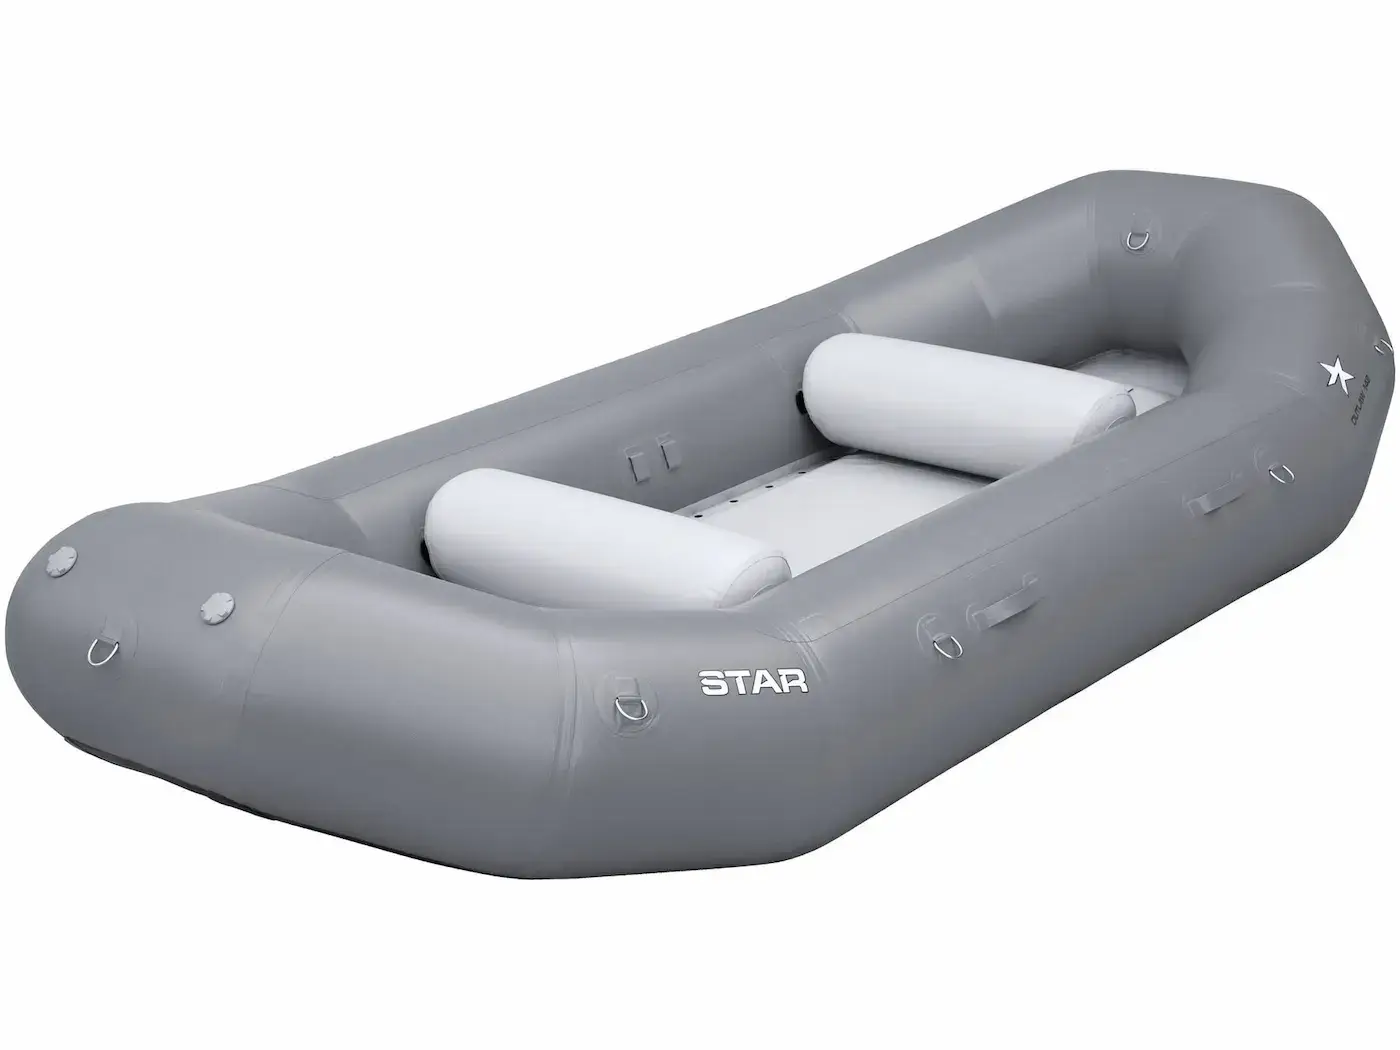 How to Choose a Raft for Multi-Day Trips